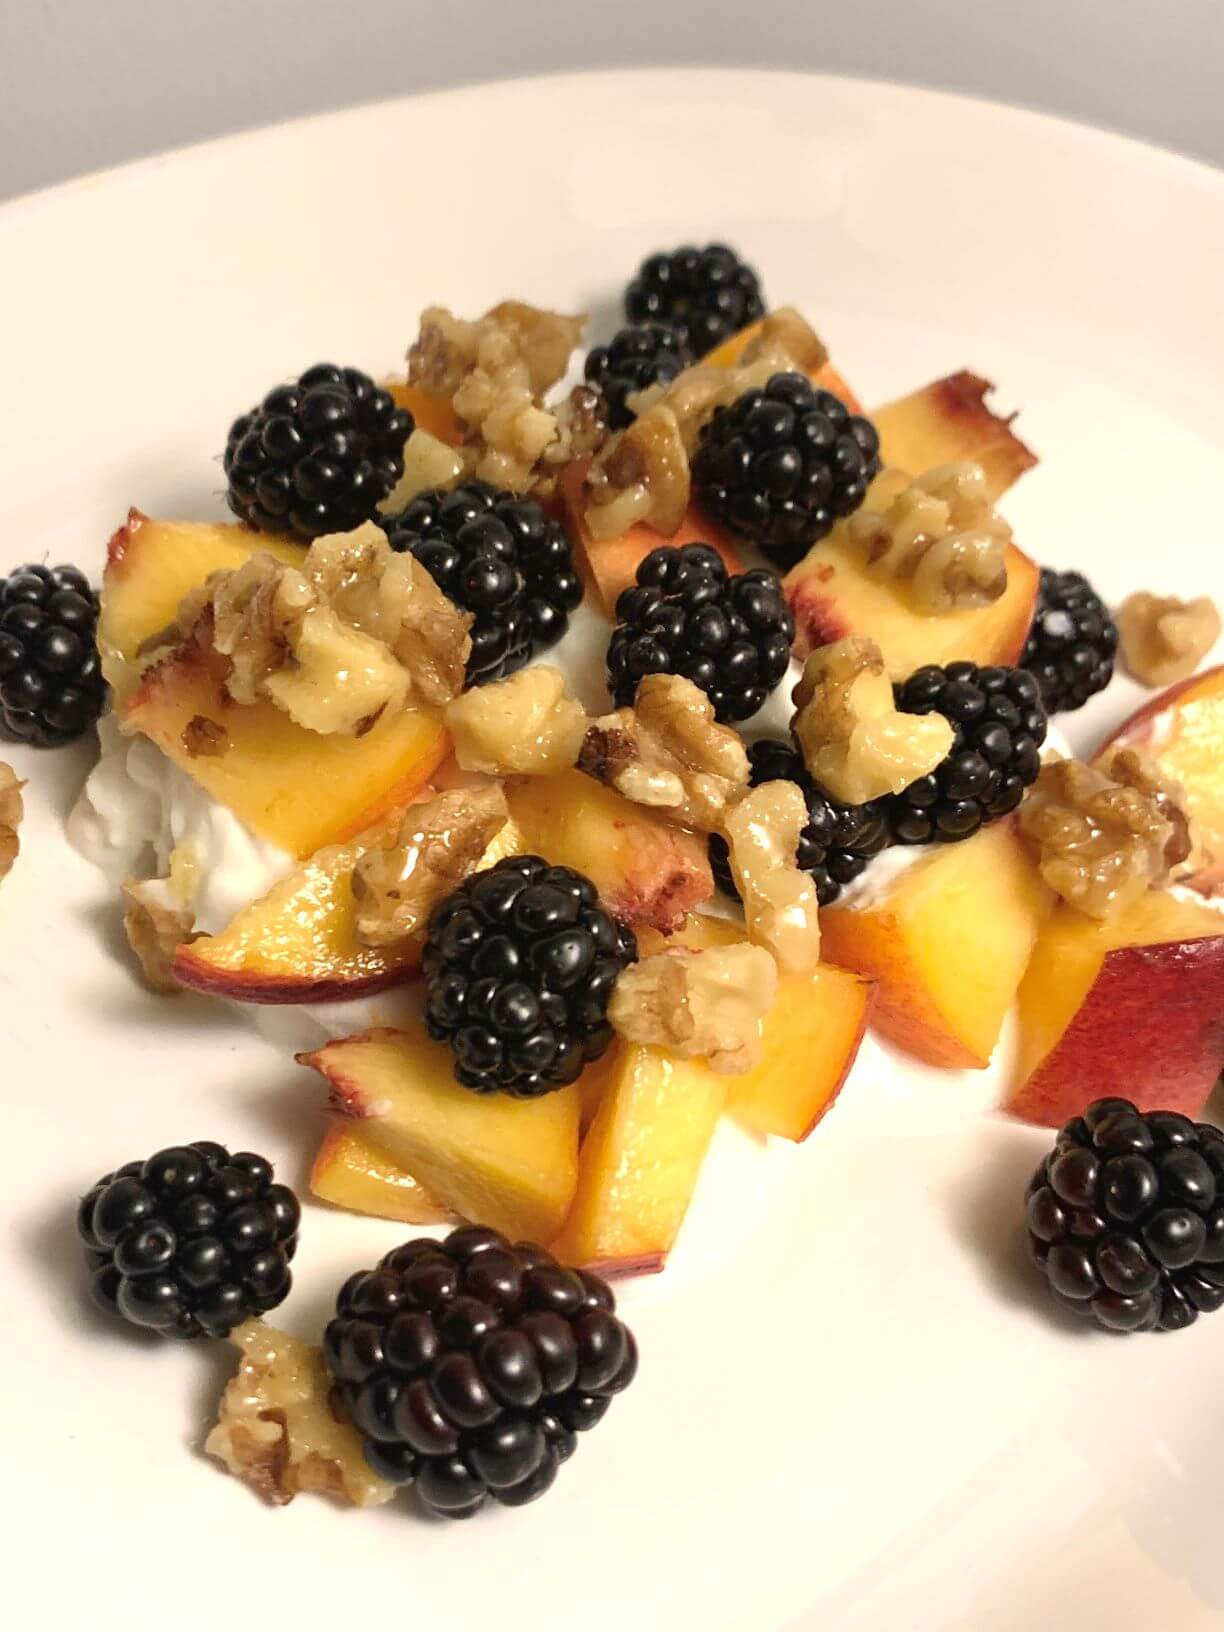 Vertical image of white oval CorningWare plate with Greek yogurt, diced peaches, blackberries, and walnut pieces covered in honey and vanilla extract